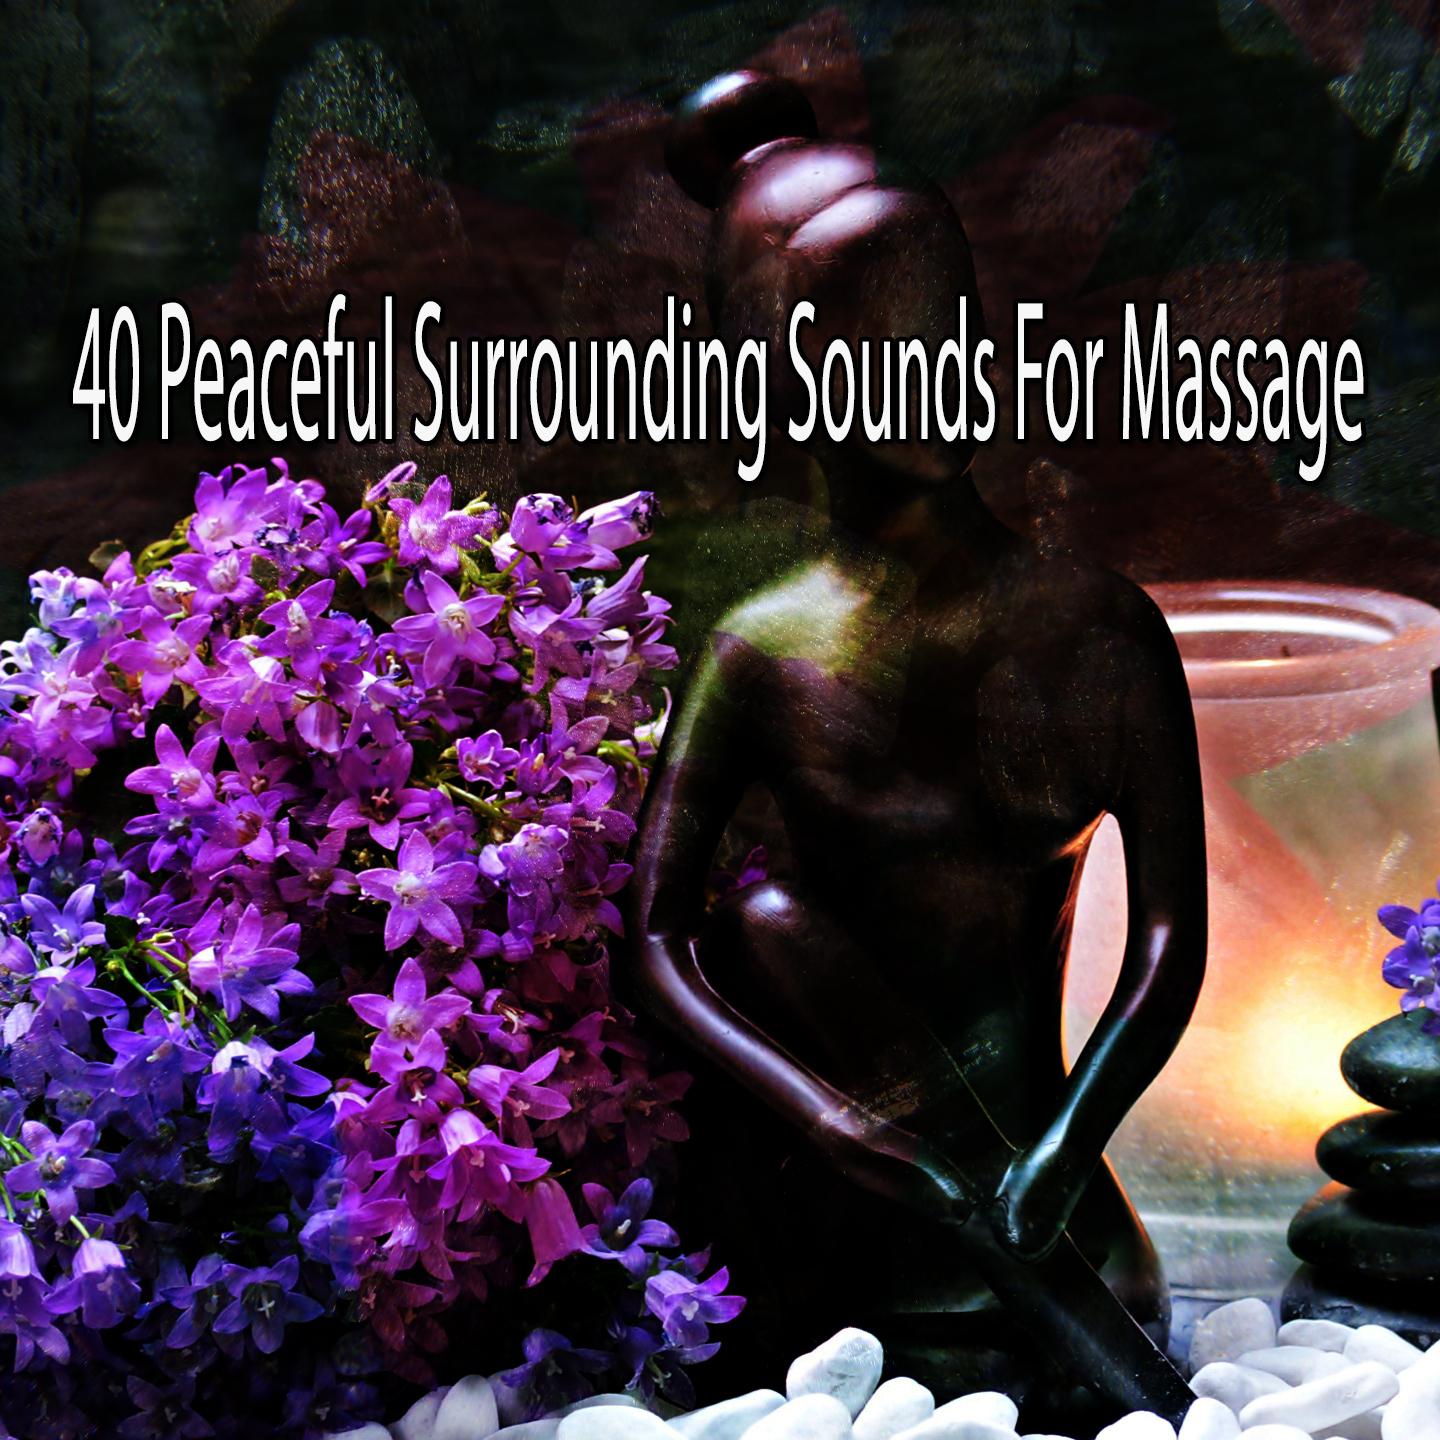 40 Peaceful Surrounding Sounds for Massage